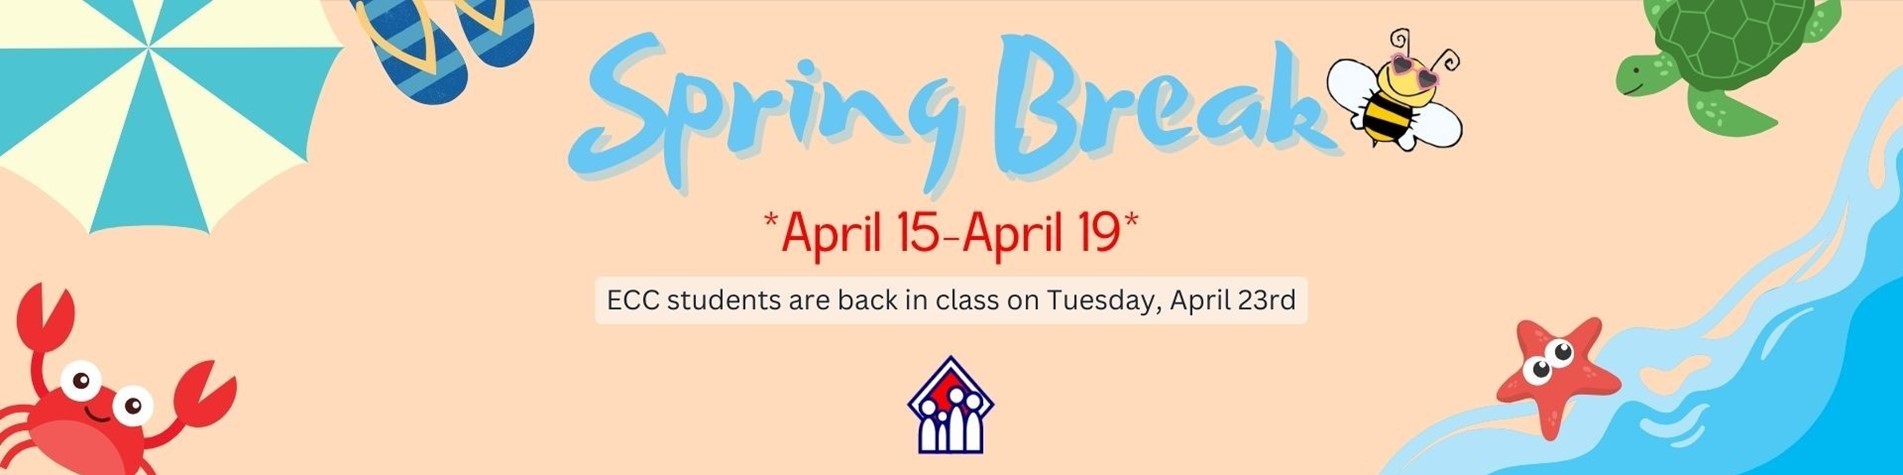 Spring Break; students are back on campus Tuesday, April 23rd